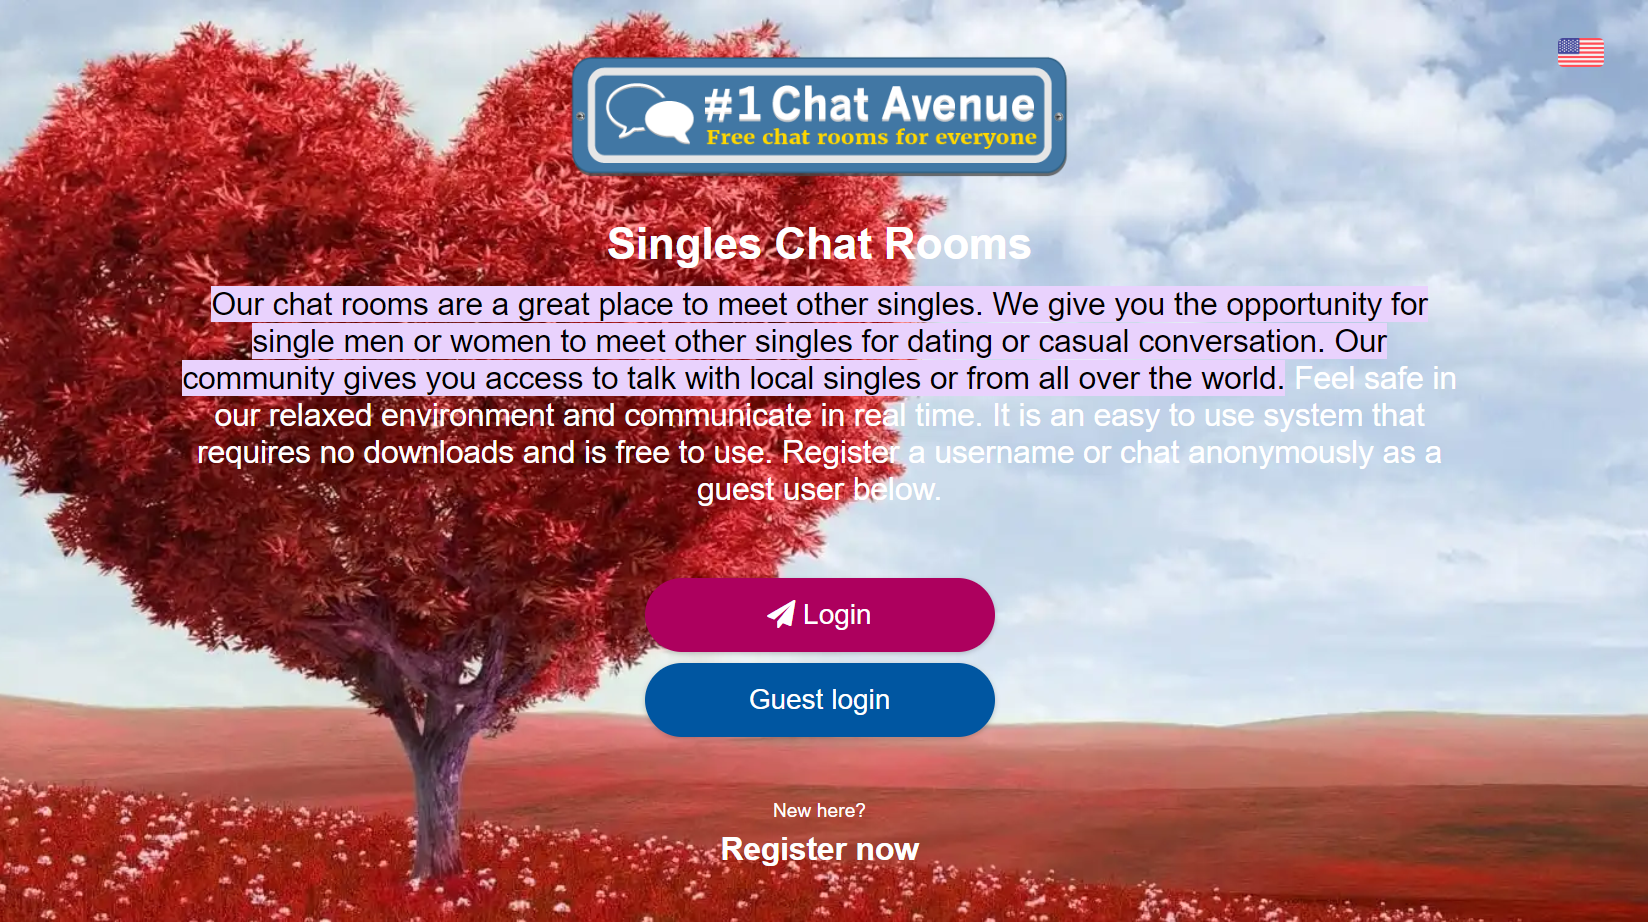 The homepage of the Chat Avenue website.